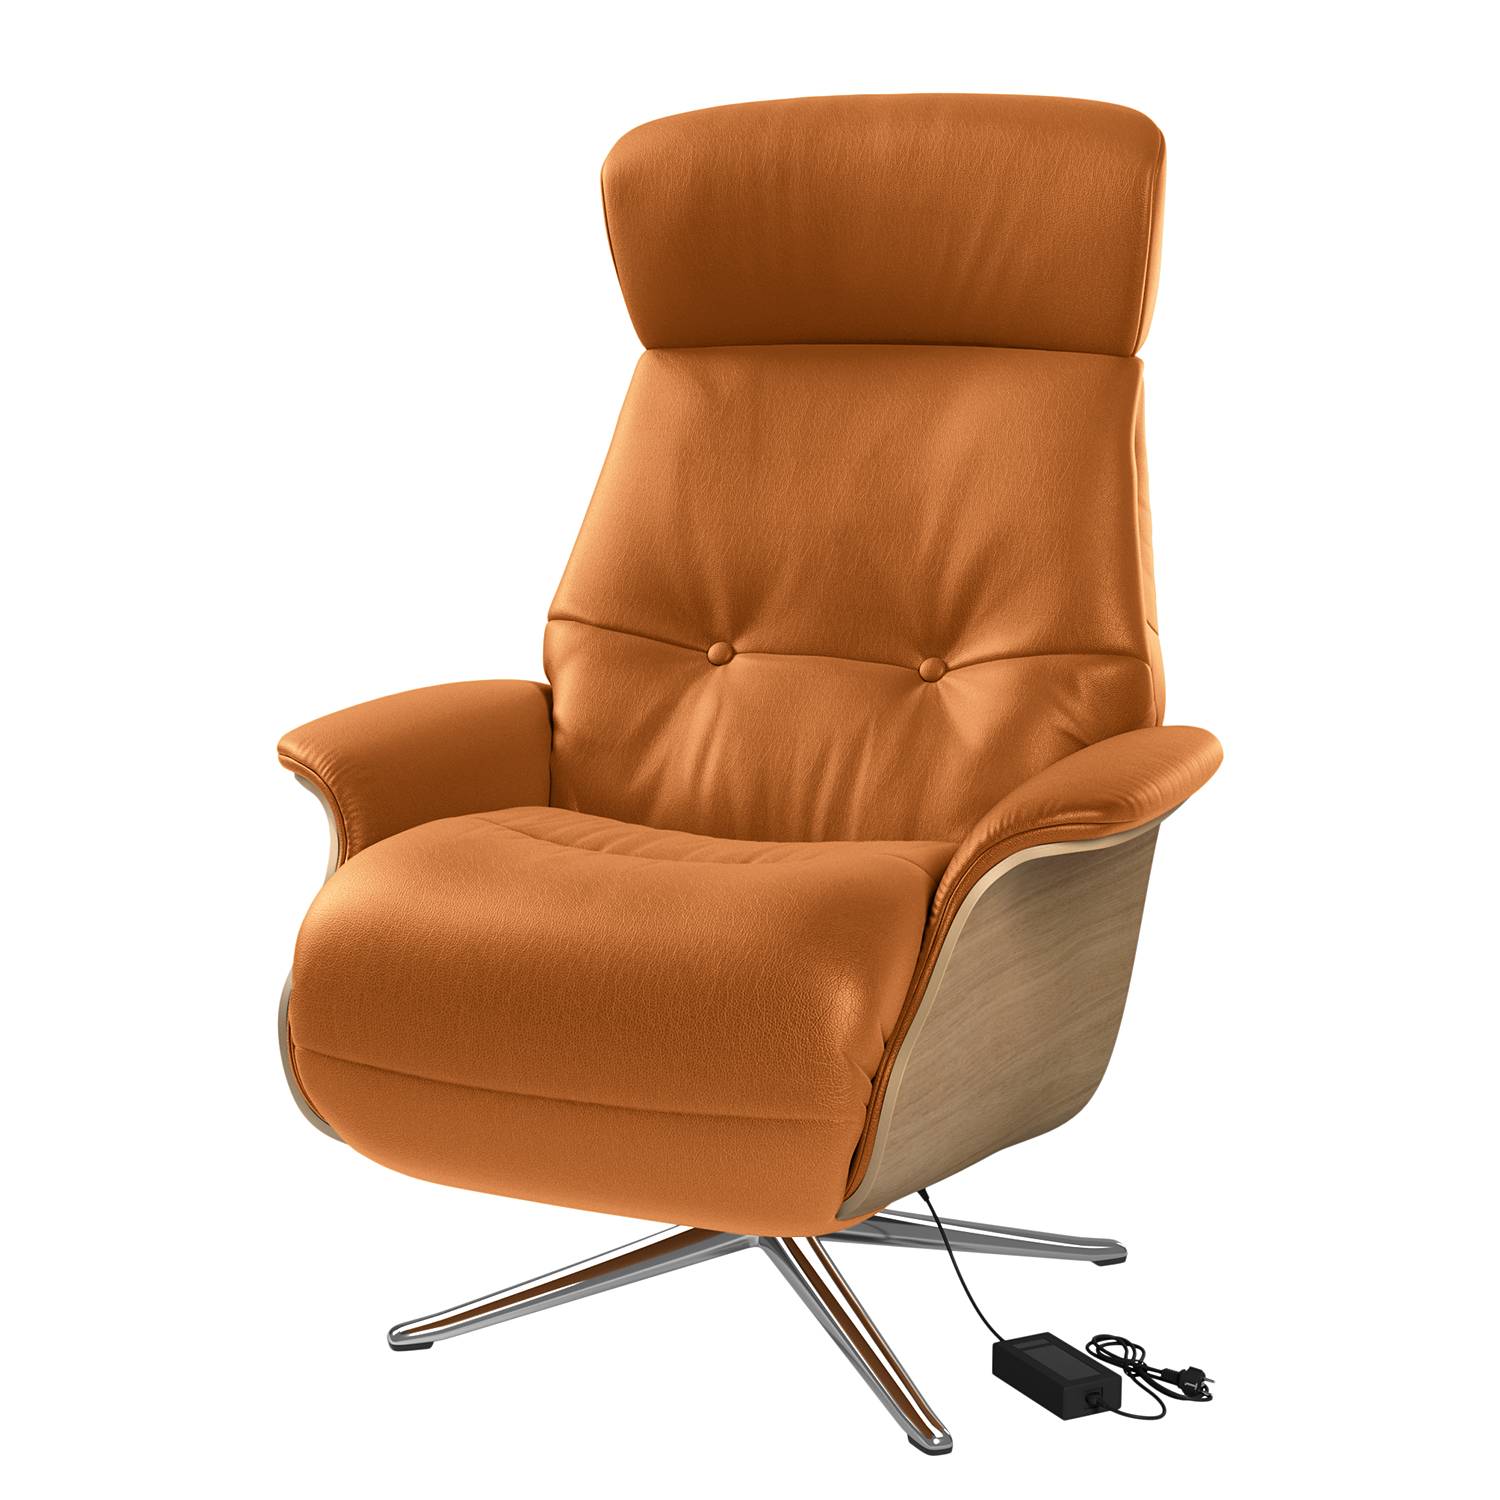 Image of Fauteuil relax Anderson VI 000000001000131437